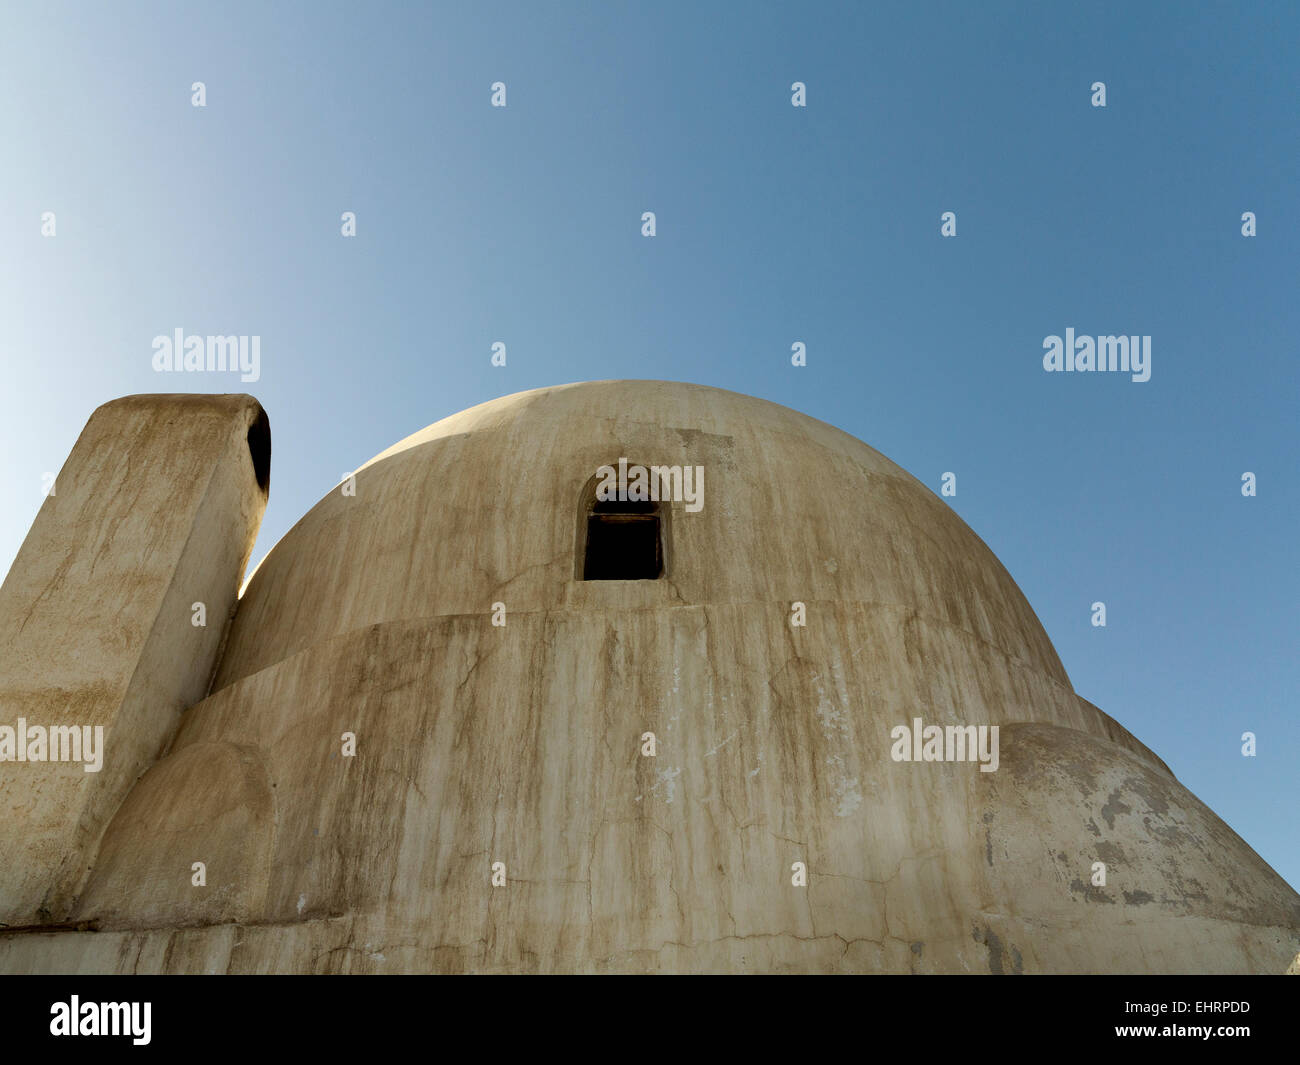 Small house with single dome and small window with adjoining chimney against a blue sky Egypt Africa Stock Photo